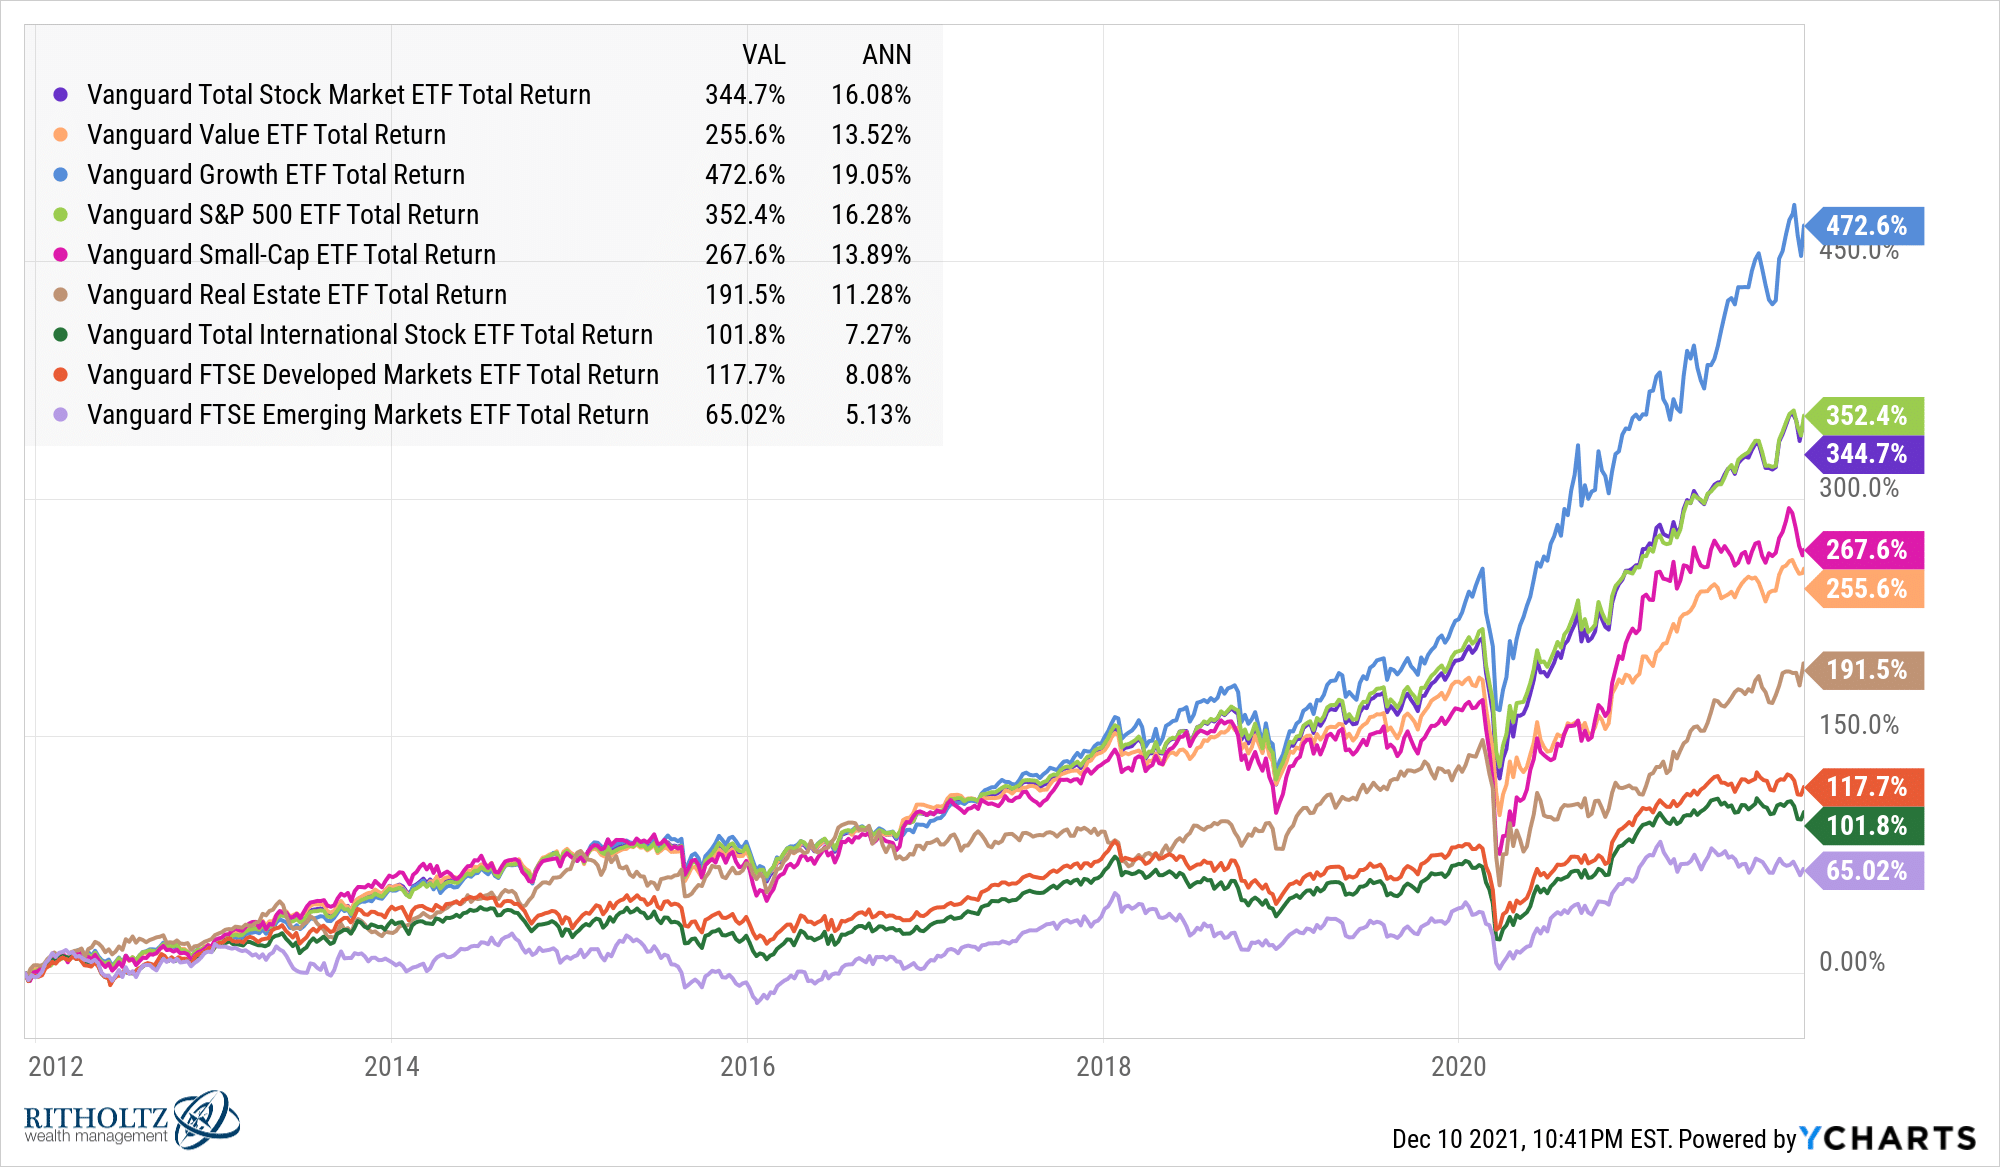 https://realinvestmentadvice.com/wp-content/uploads/2021/12/Decade-Returns-for-last-10-years.png